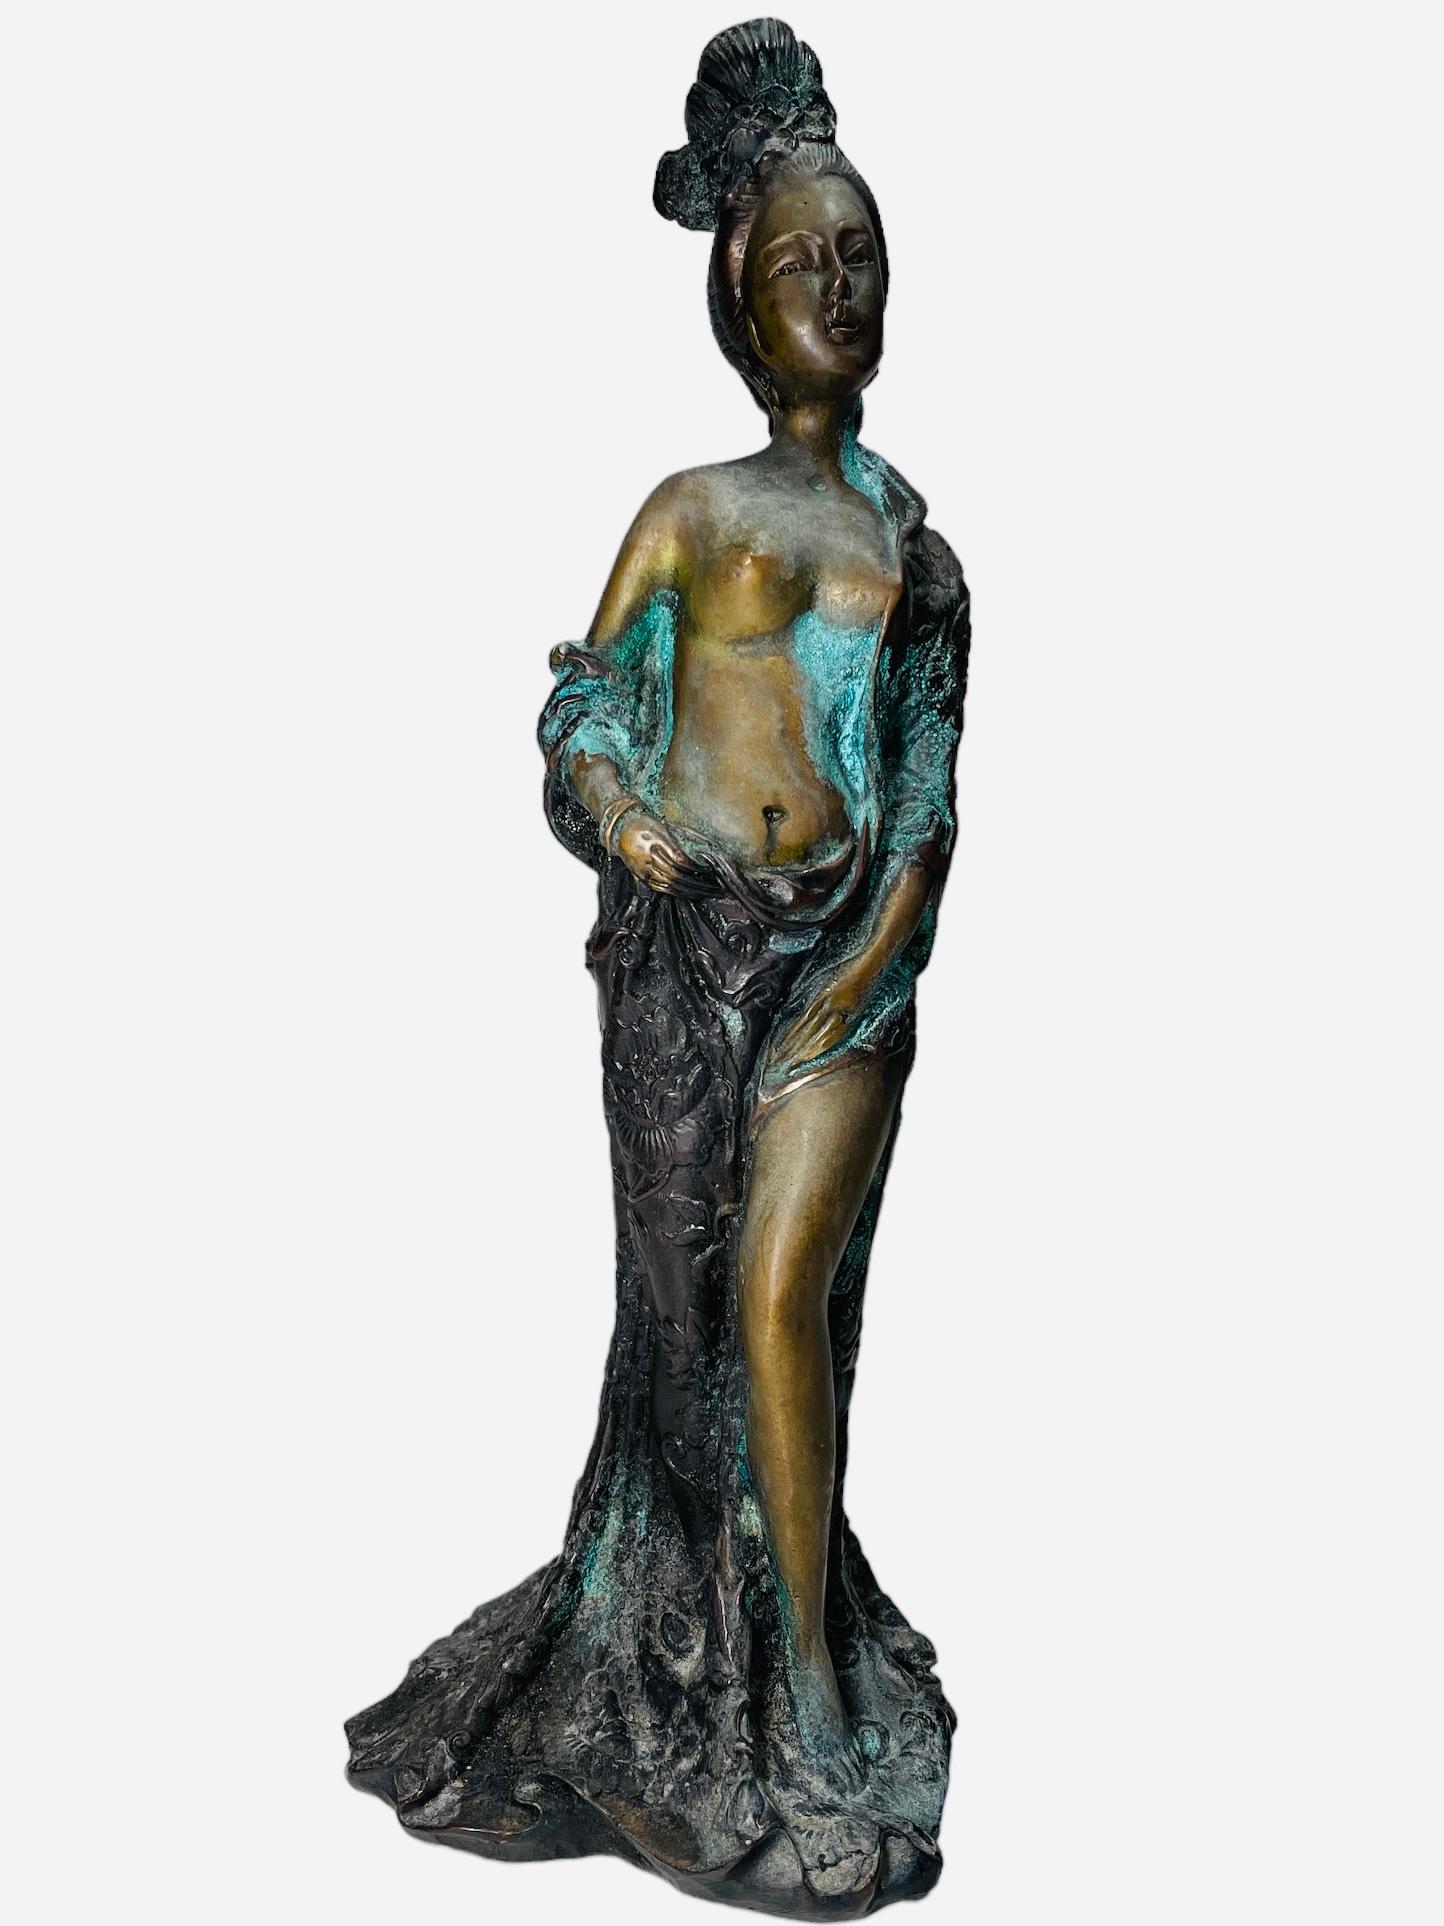 This is a Bronze Sculpture of a Chinese Lady. It depicts a semi nude Chinese lady standing up and wrapped with a robe around one of her shoulders, the back, below the hip and one of her legs. The robe is adorned with high relief of flowers. She has